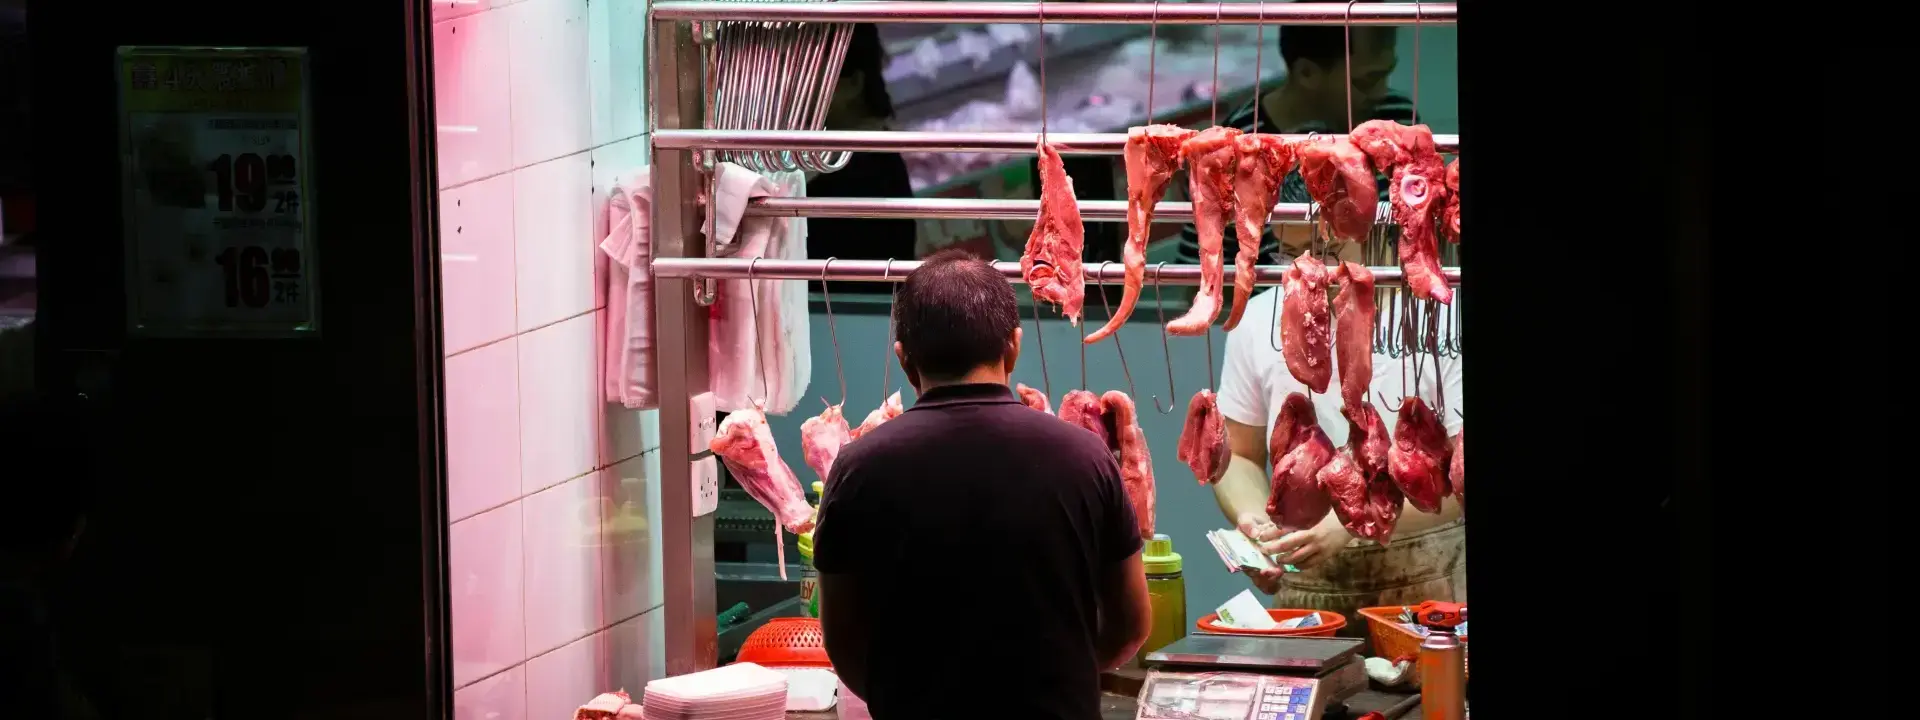 Butcher Staff in France